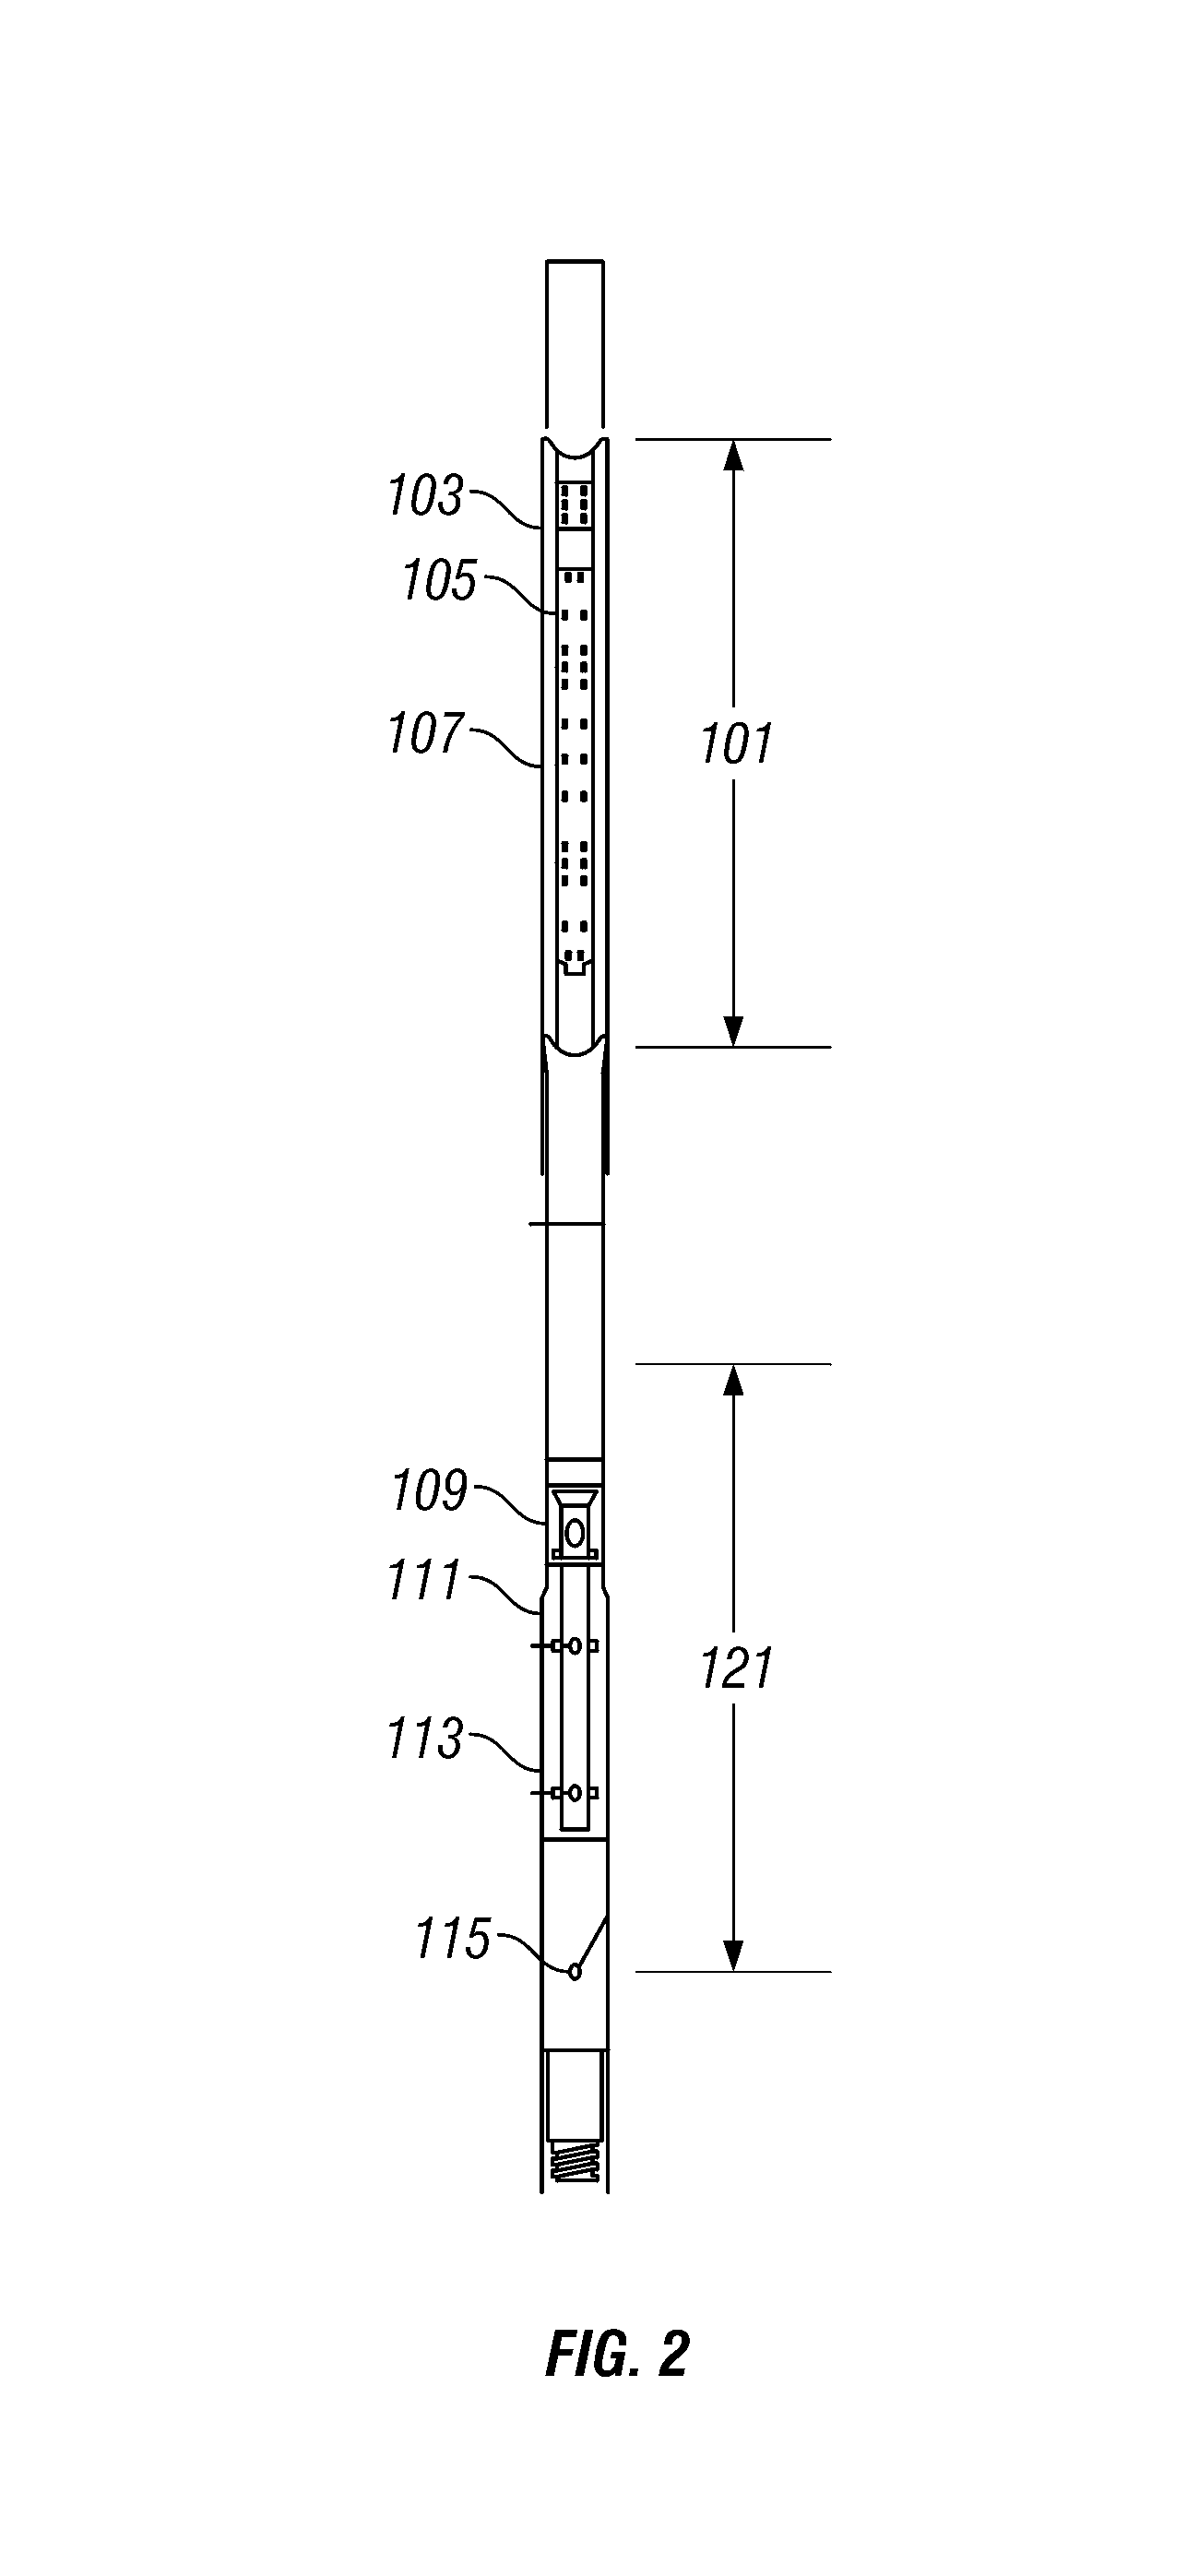 Method for determining formation porosity and gas saturation in a gas reservoir